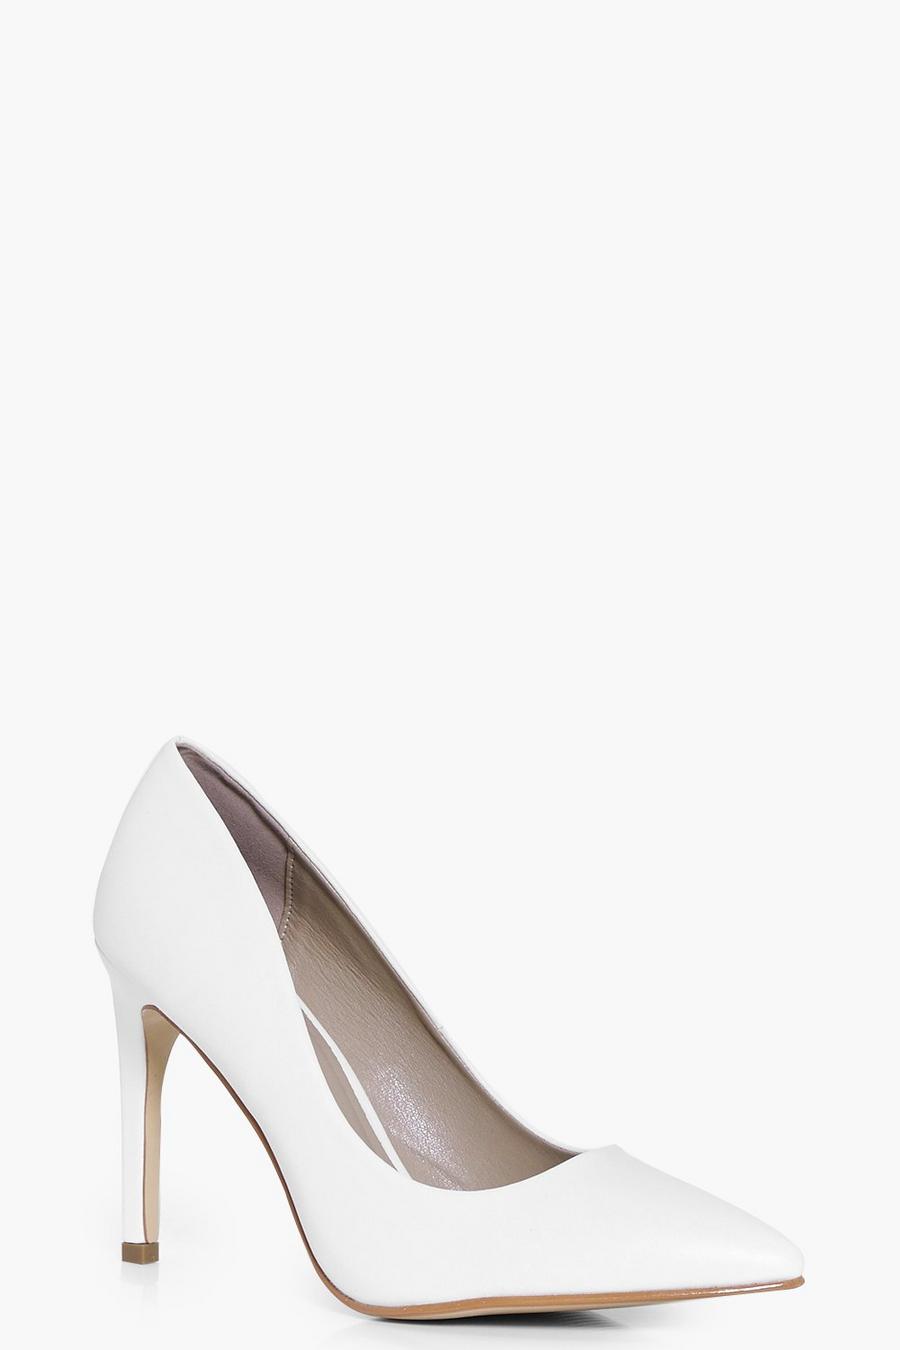 Amie Patent Pointed Pumps image number 1